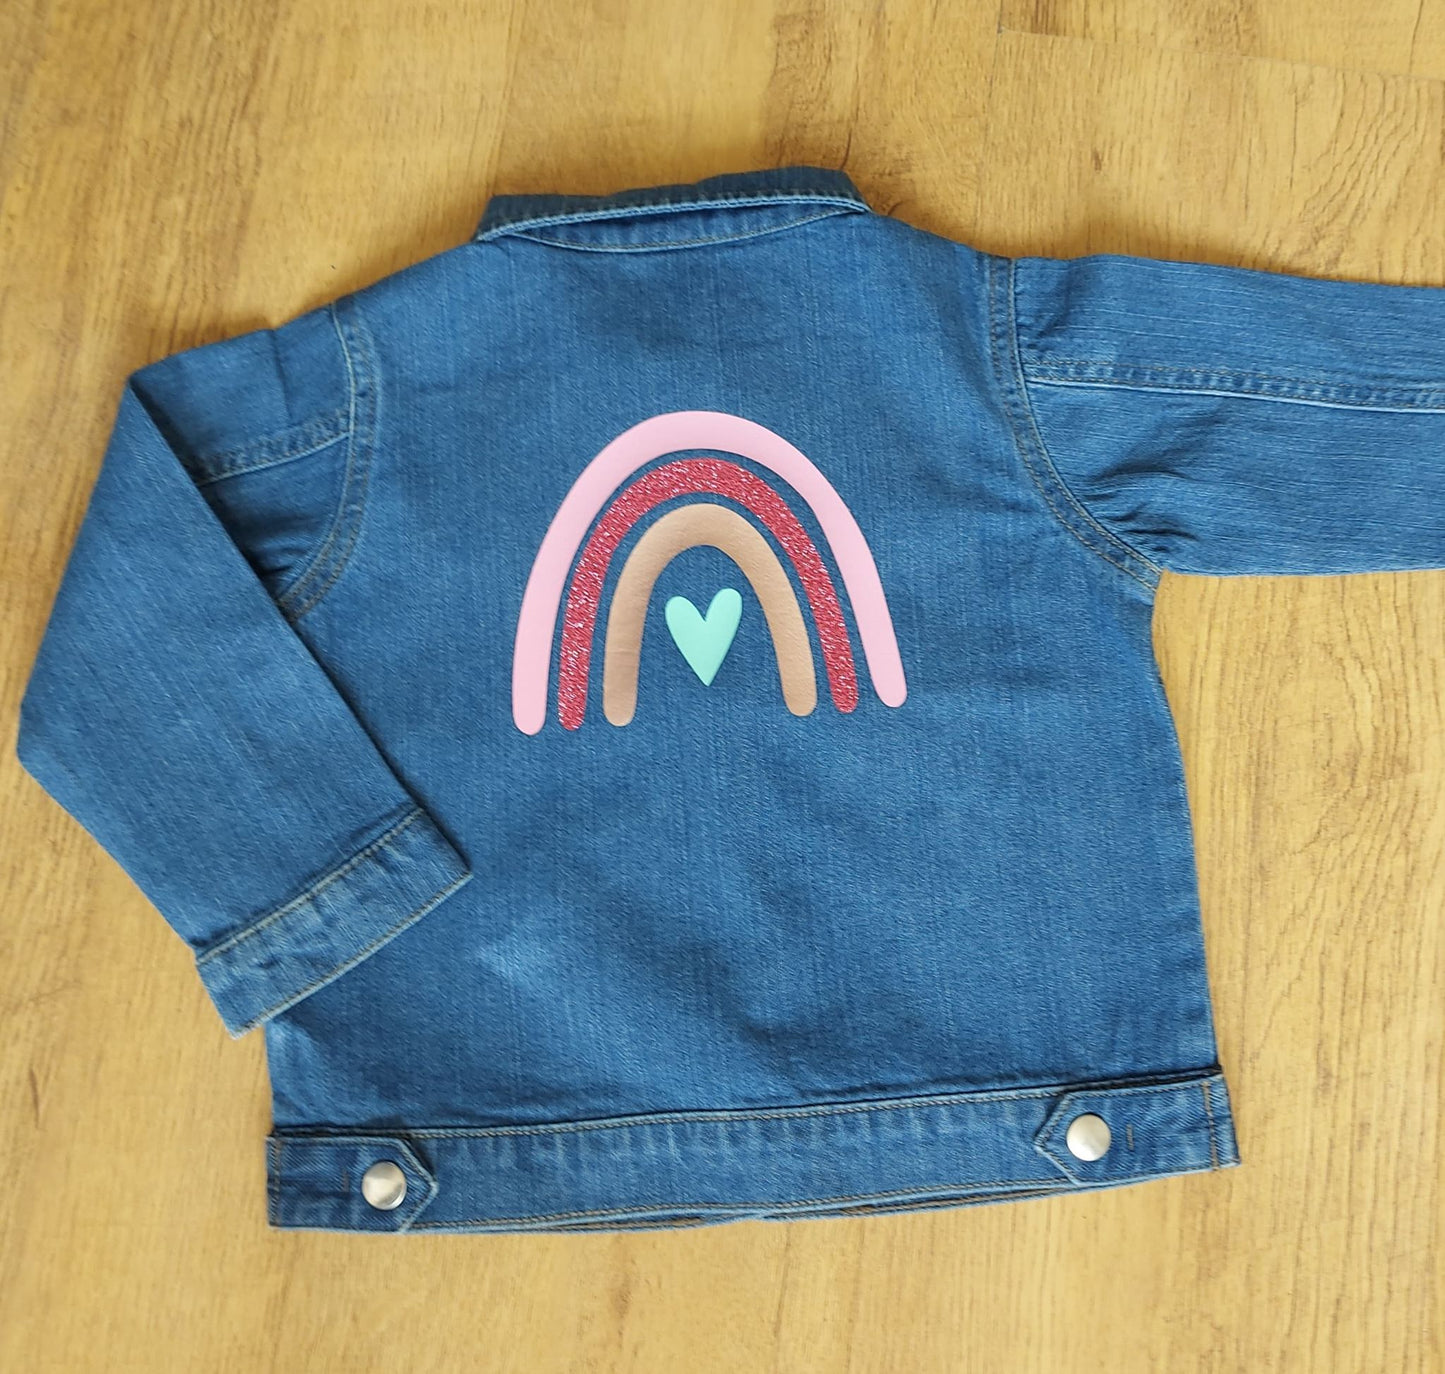 Rainbow Denim Jacket ( With or Without name added)